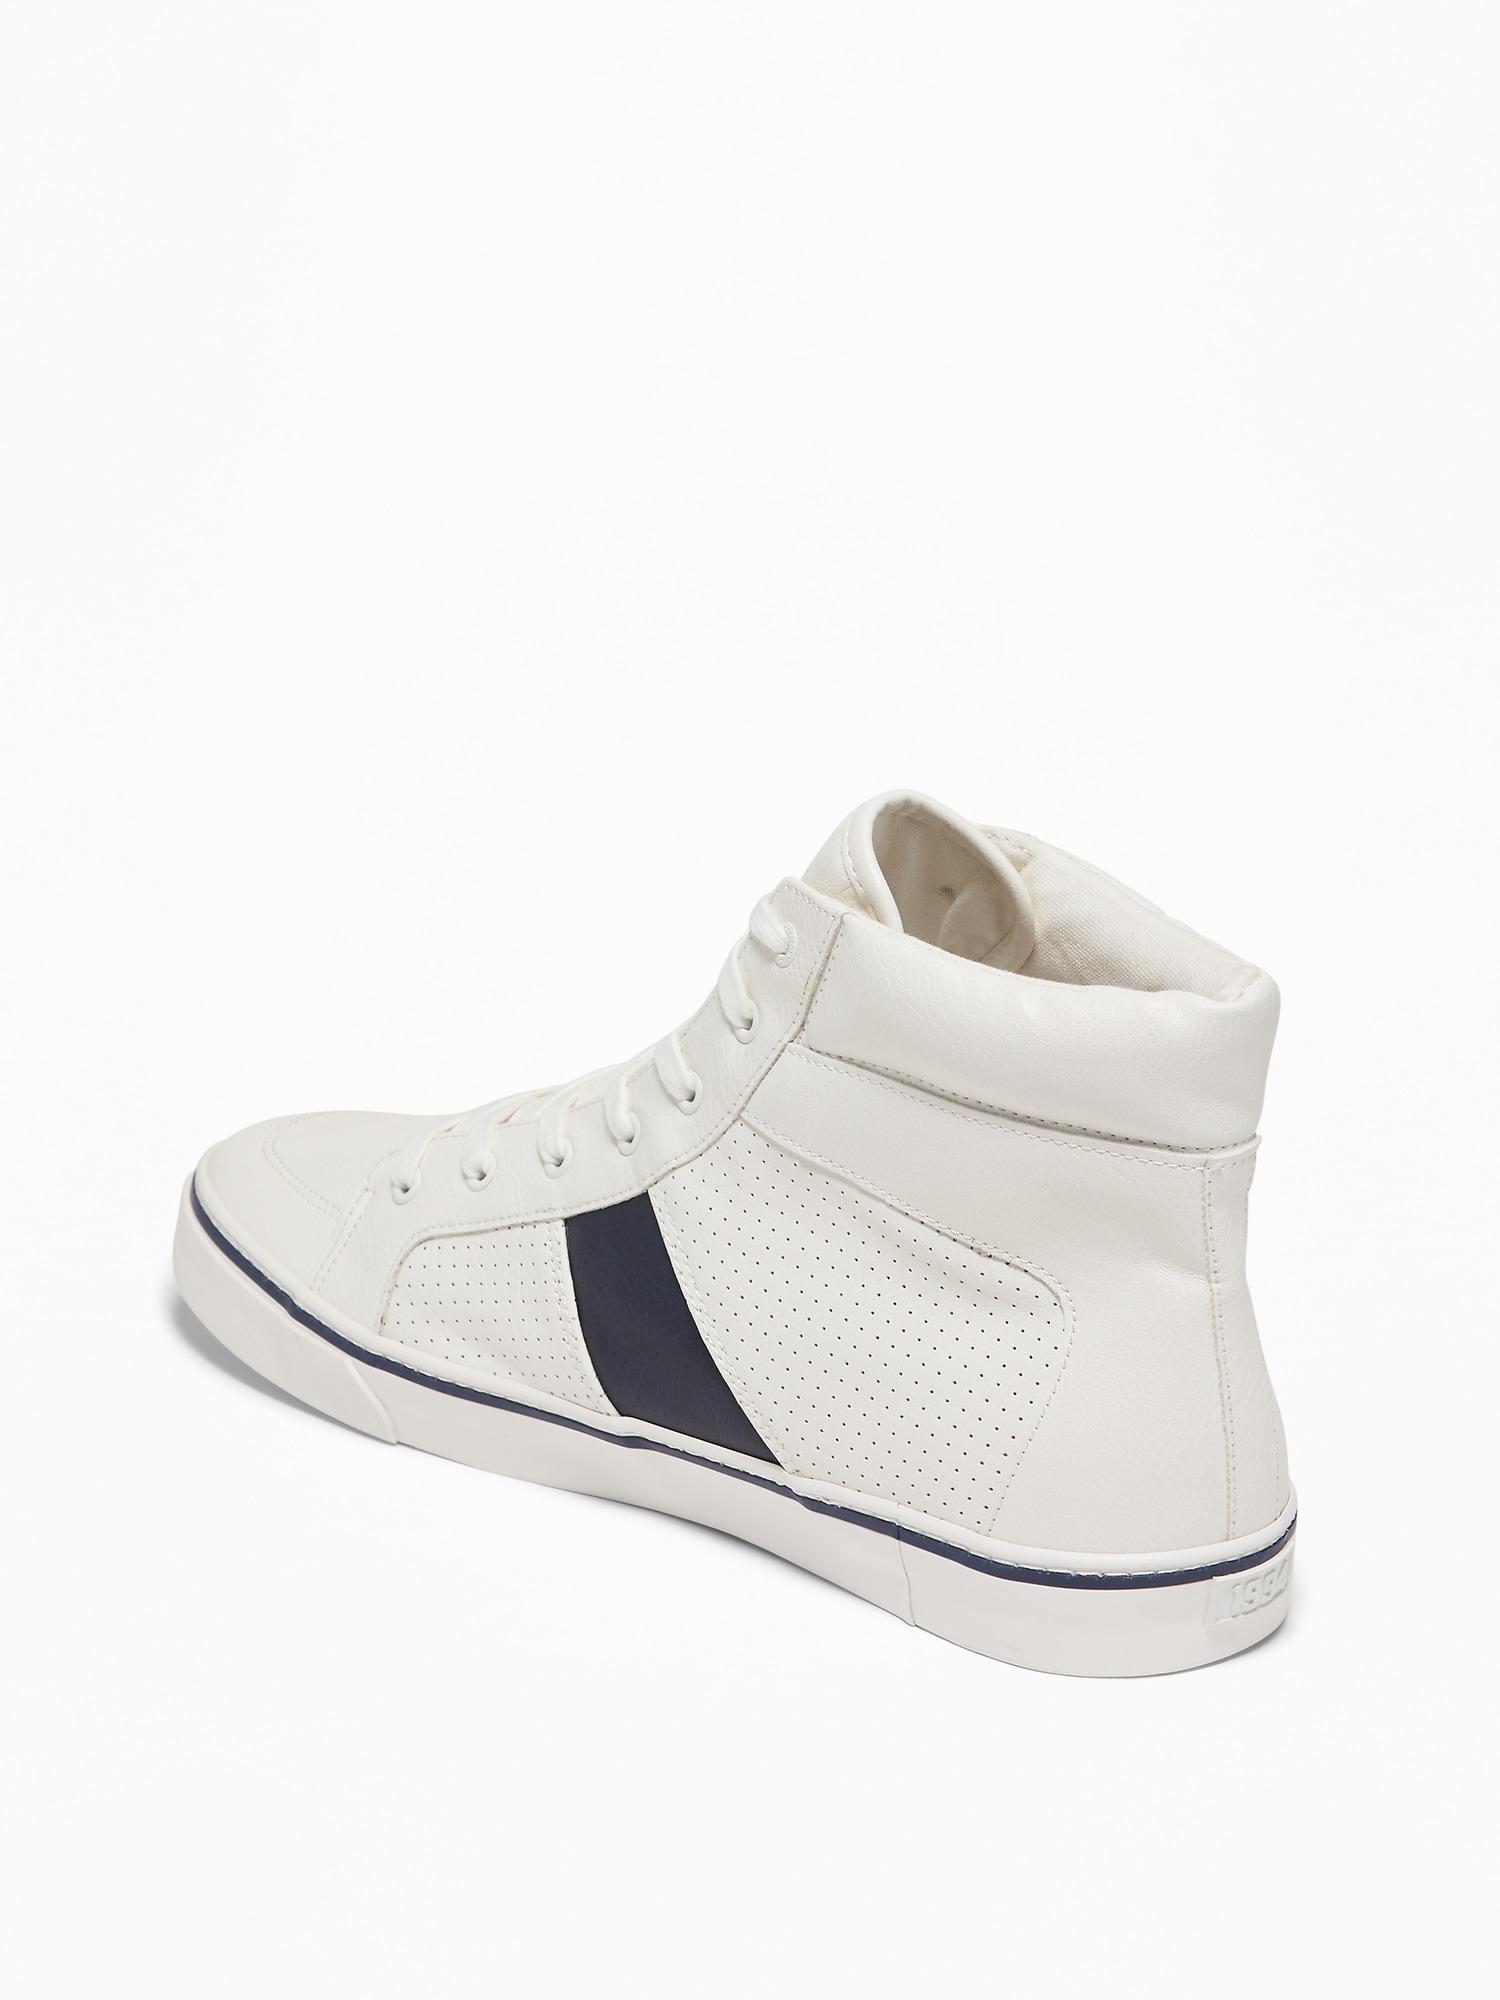 old navy white high tops